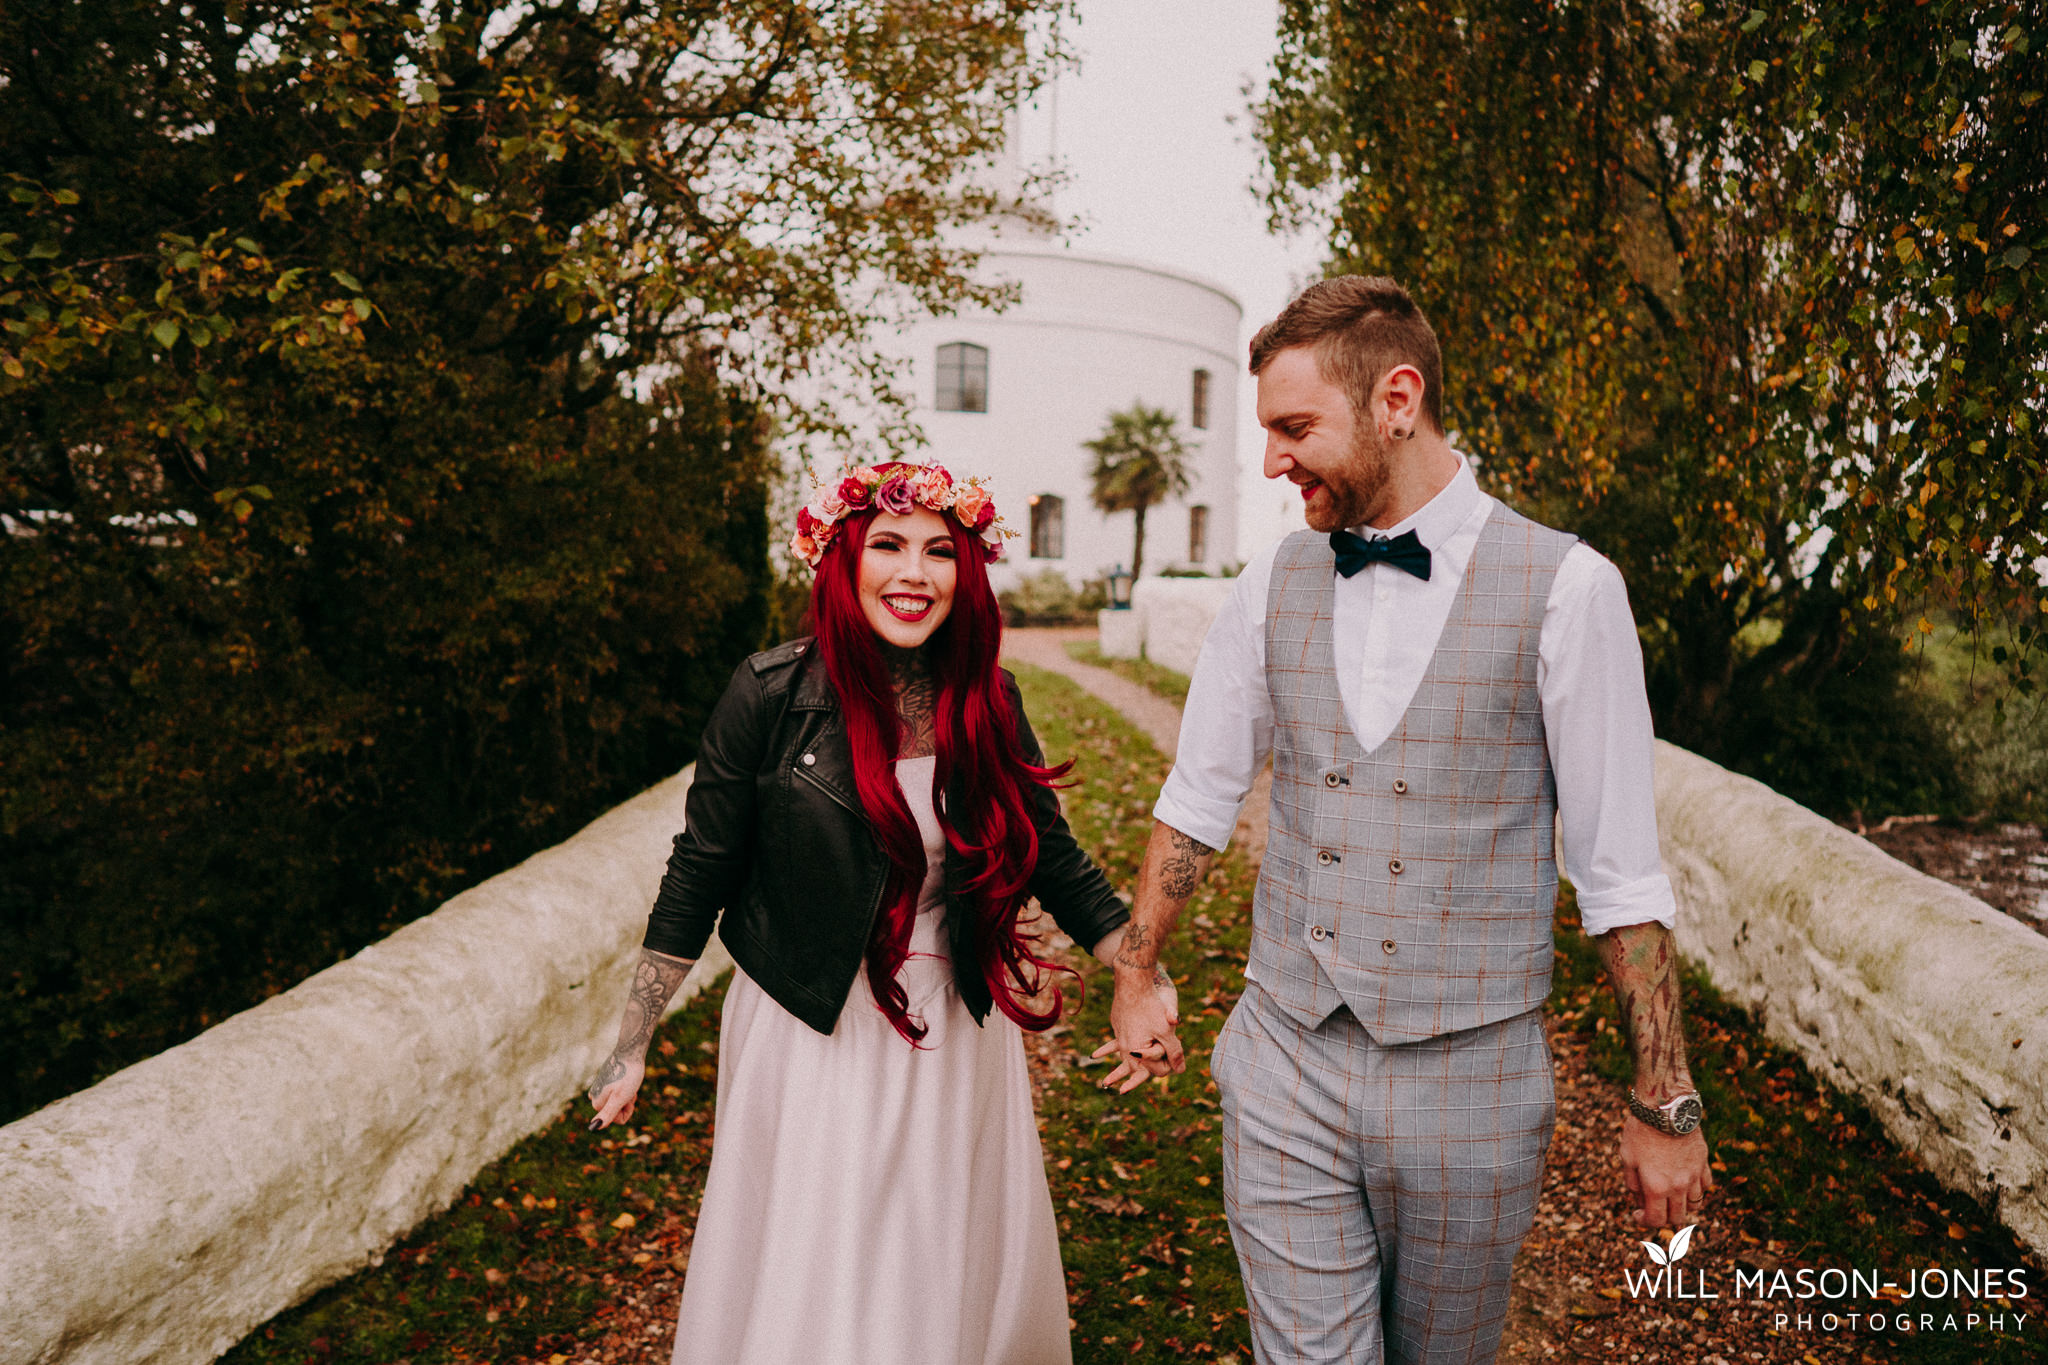  usk lighthouse wales elopement rock n roll alternative tattoo couple photography 